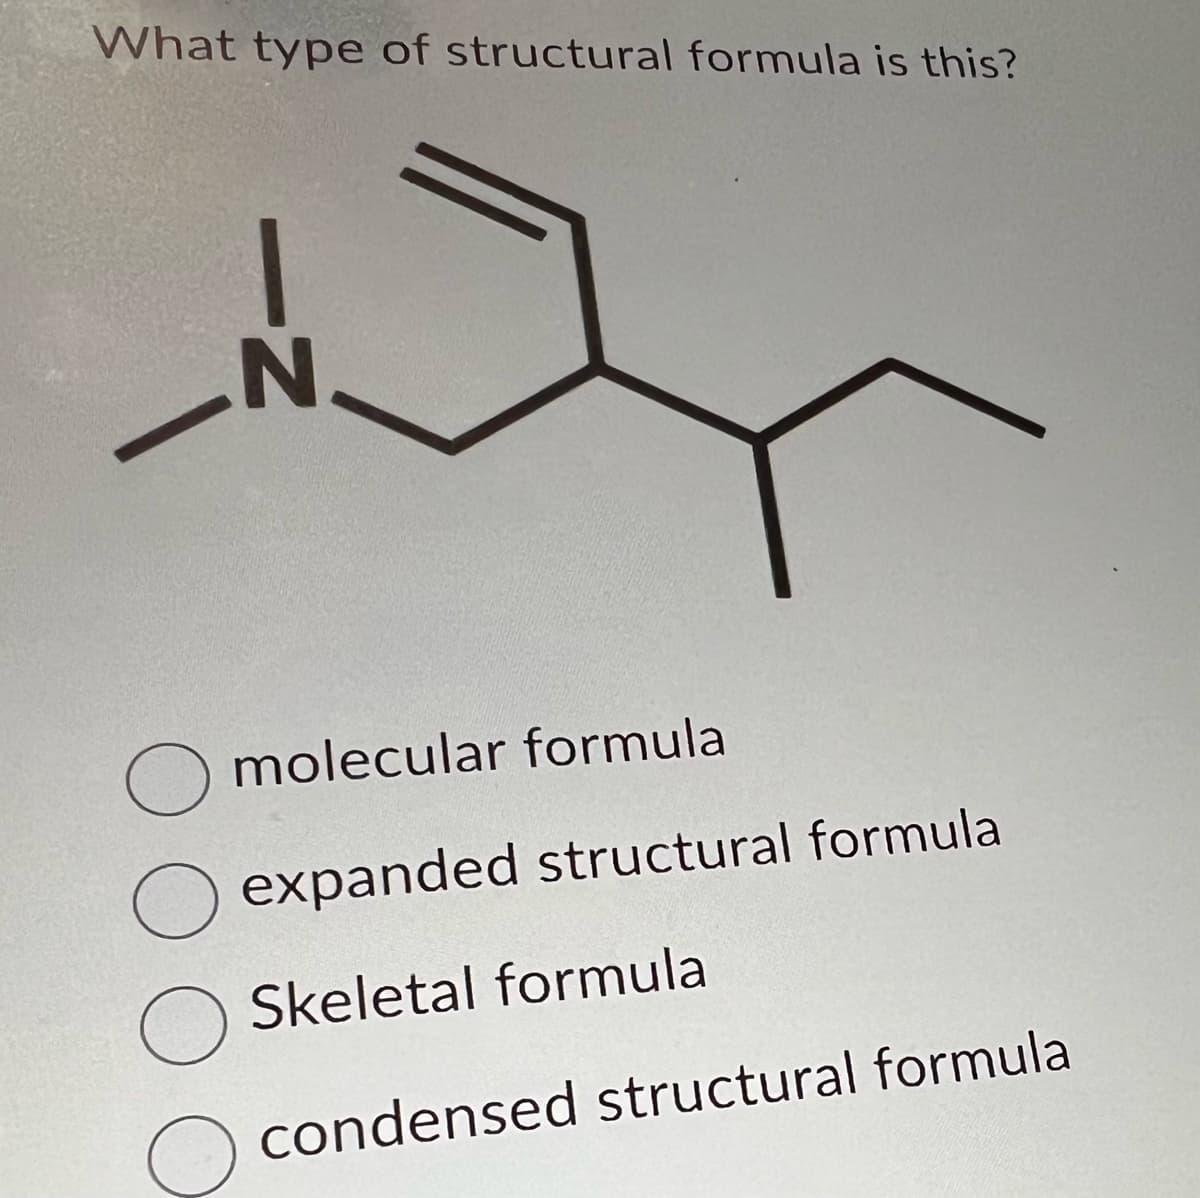 What type of structural formula is this?
-Z
N
O molecular formula
expanded structural formula
O Skeletal formula
O condensed structural formula